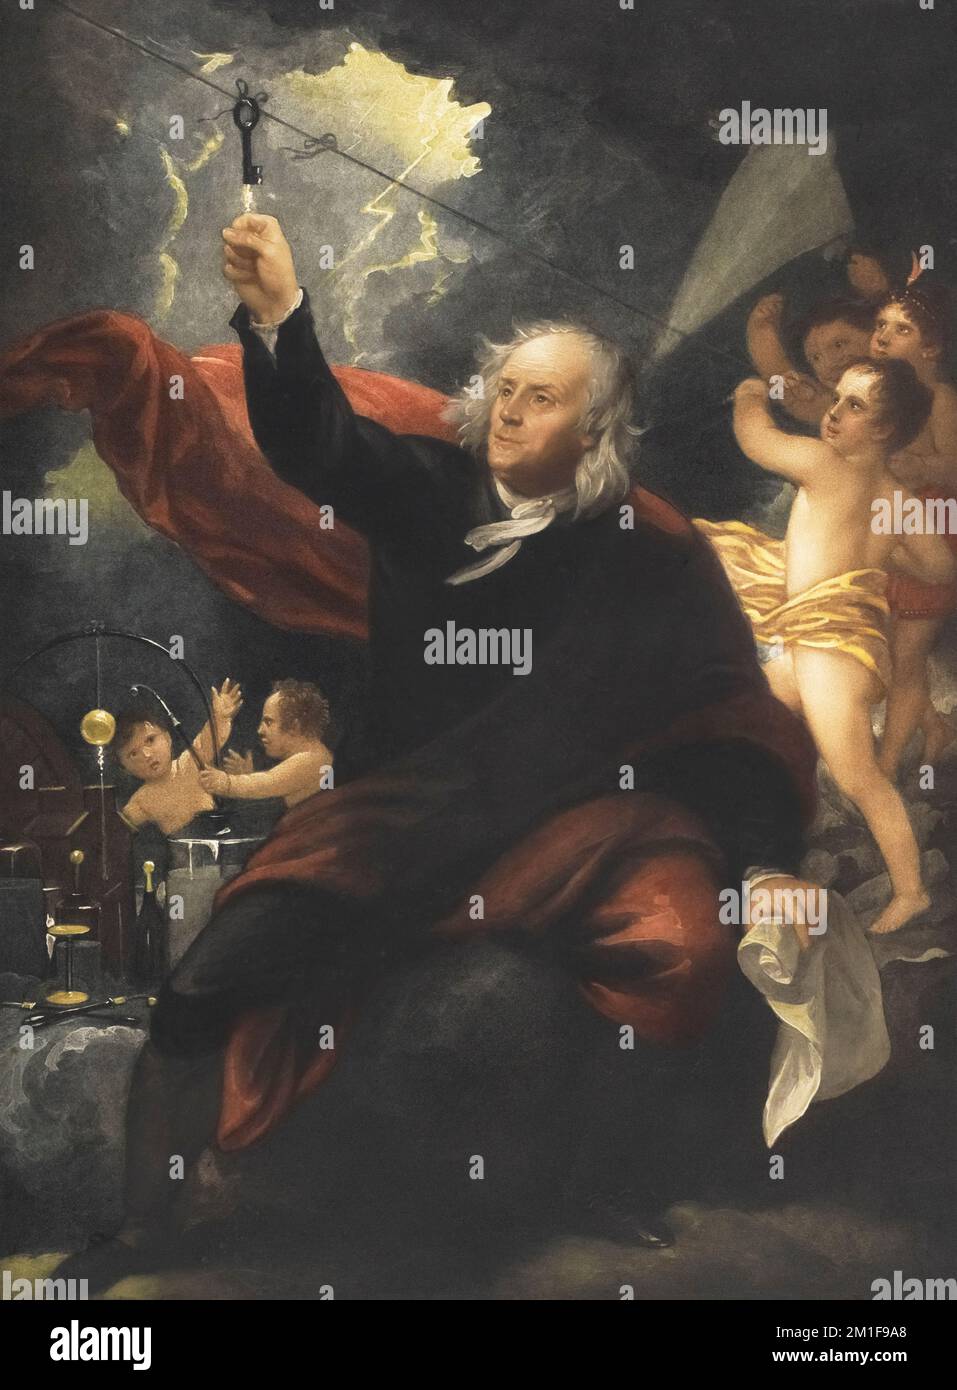 Romanticized painting of Benjamin Franklin's 1752 experiment when he flew a key attached to a kite into a thunderstorm to show that lightning was electrcity.  After the painting by Benjamin West. Stock Photo